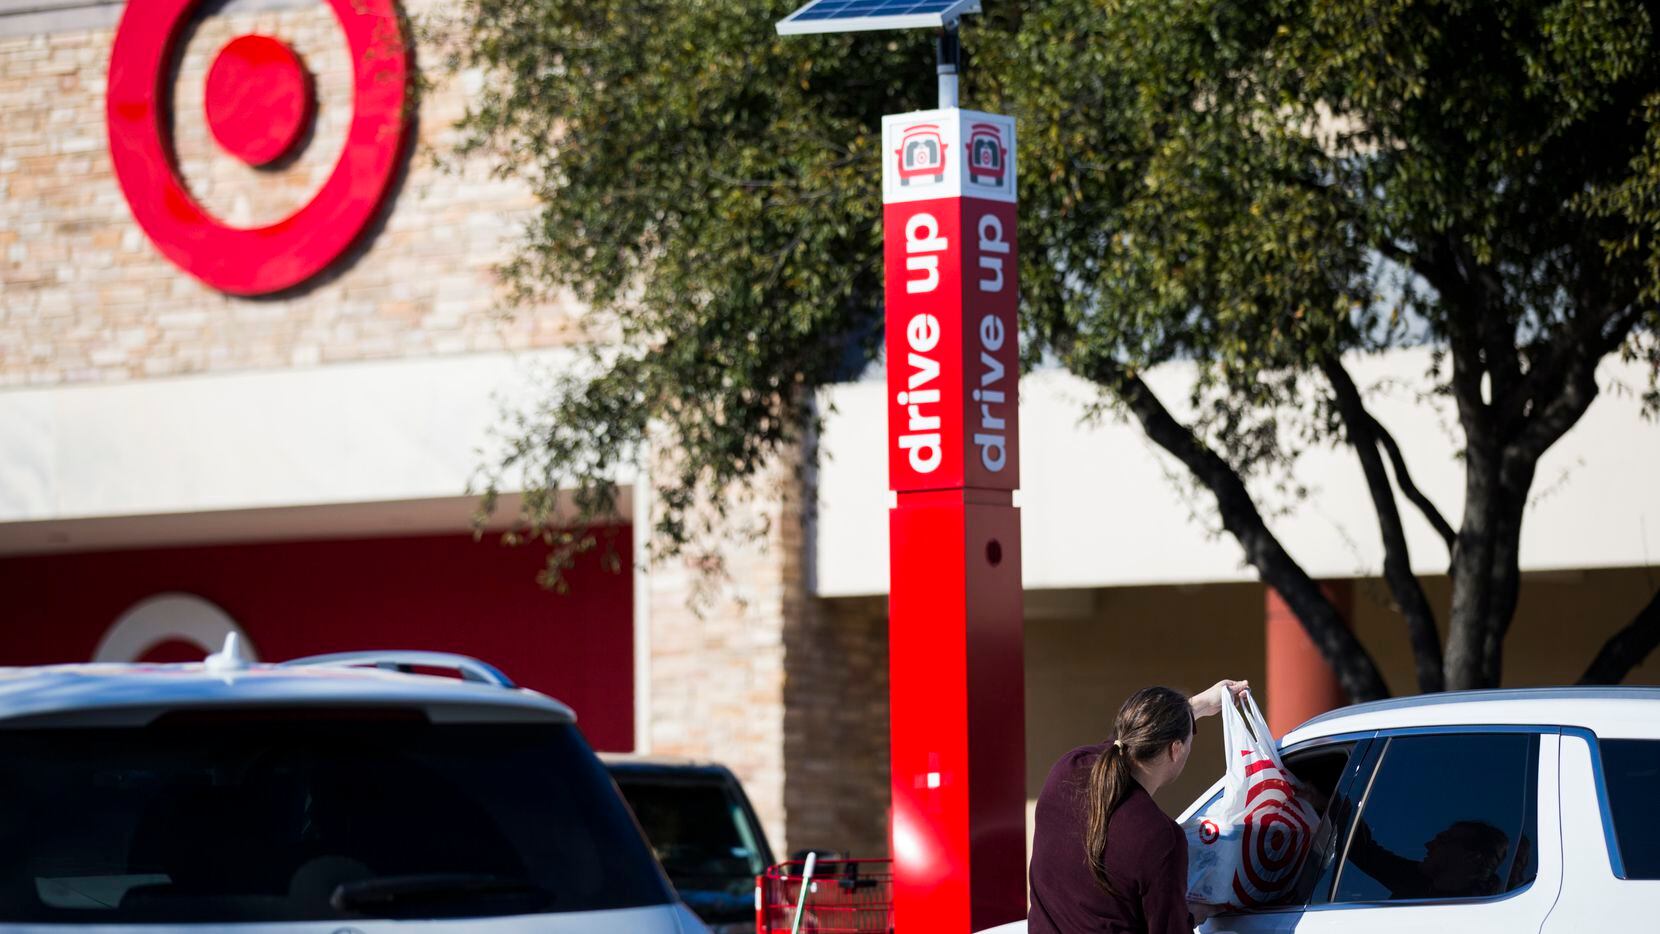 Customers pick up online orders from the Medallion Center Target.